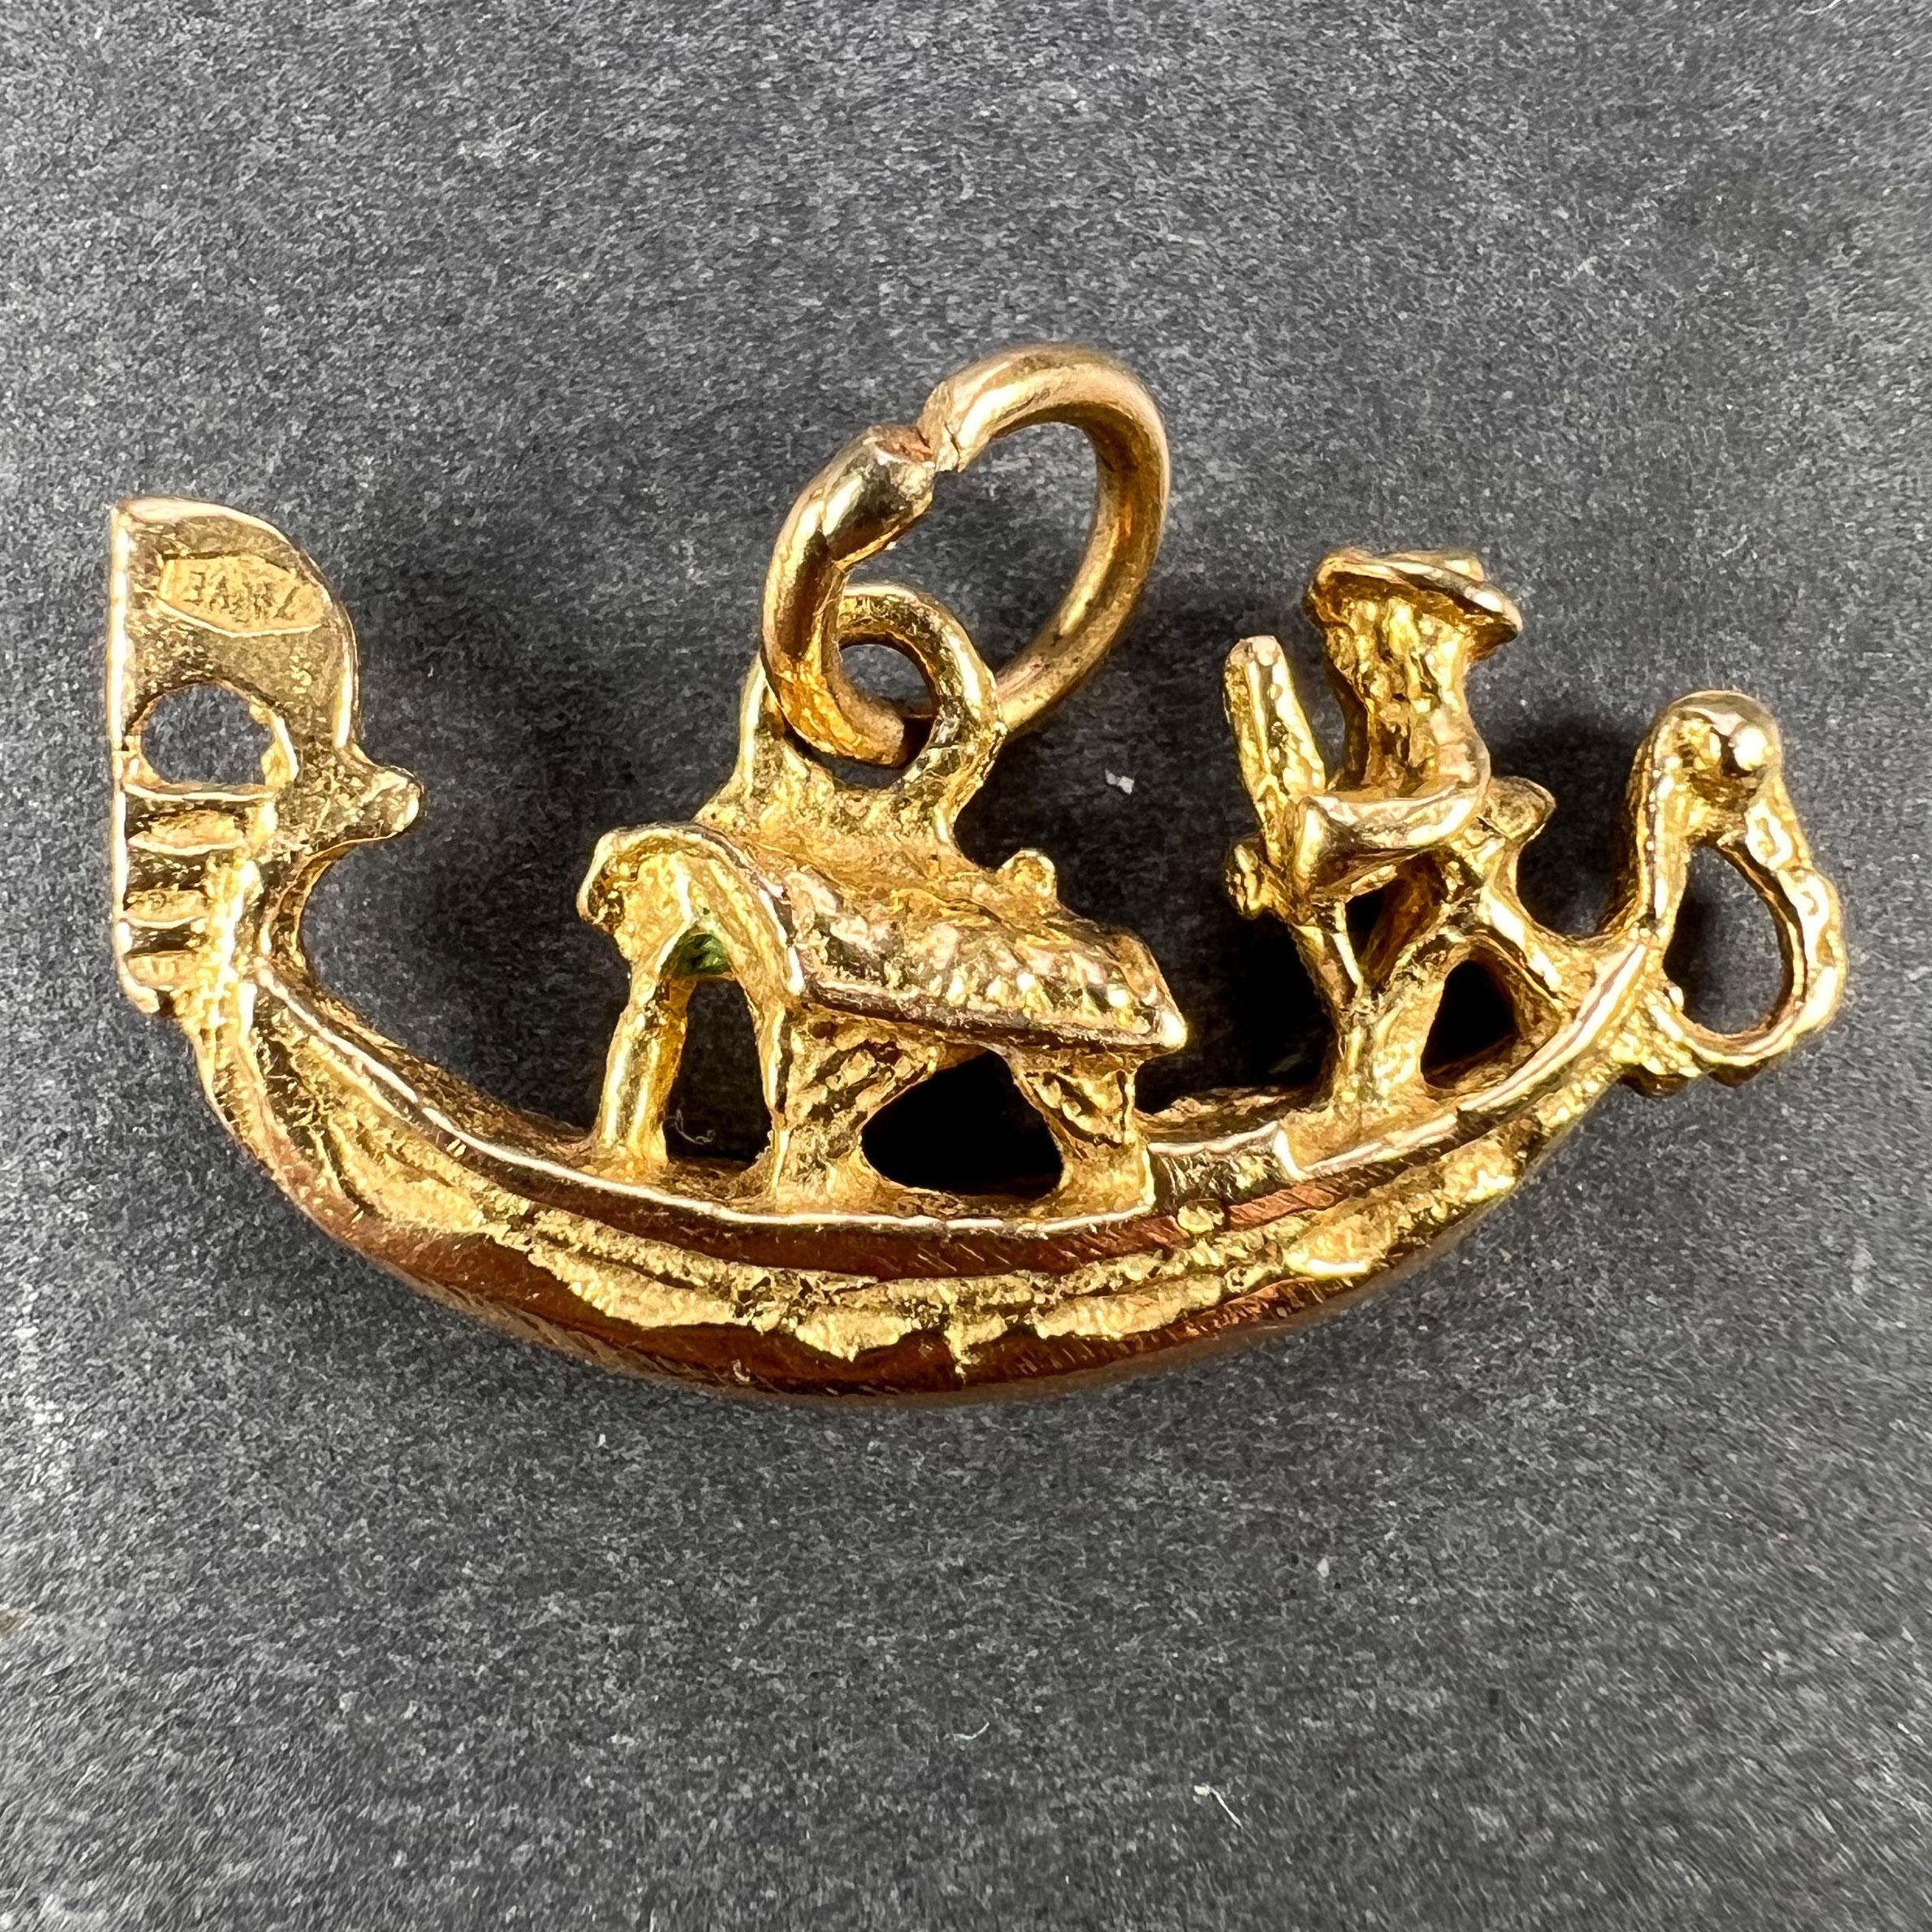 Italian Gondola Boat 18k Yellow Gold Charm Pendant In Good Condition For Sale In London, GB